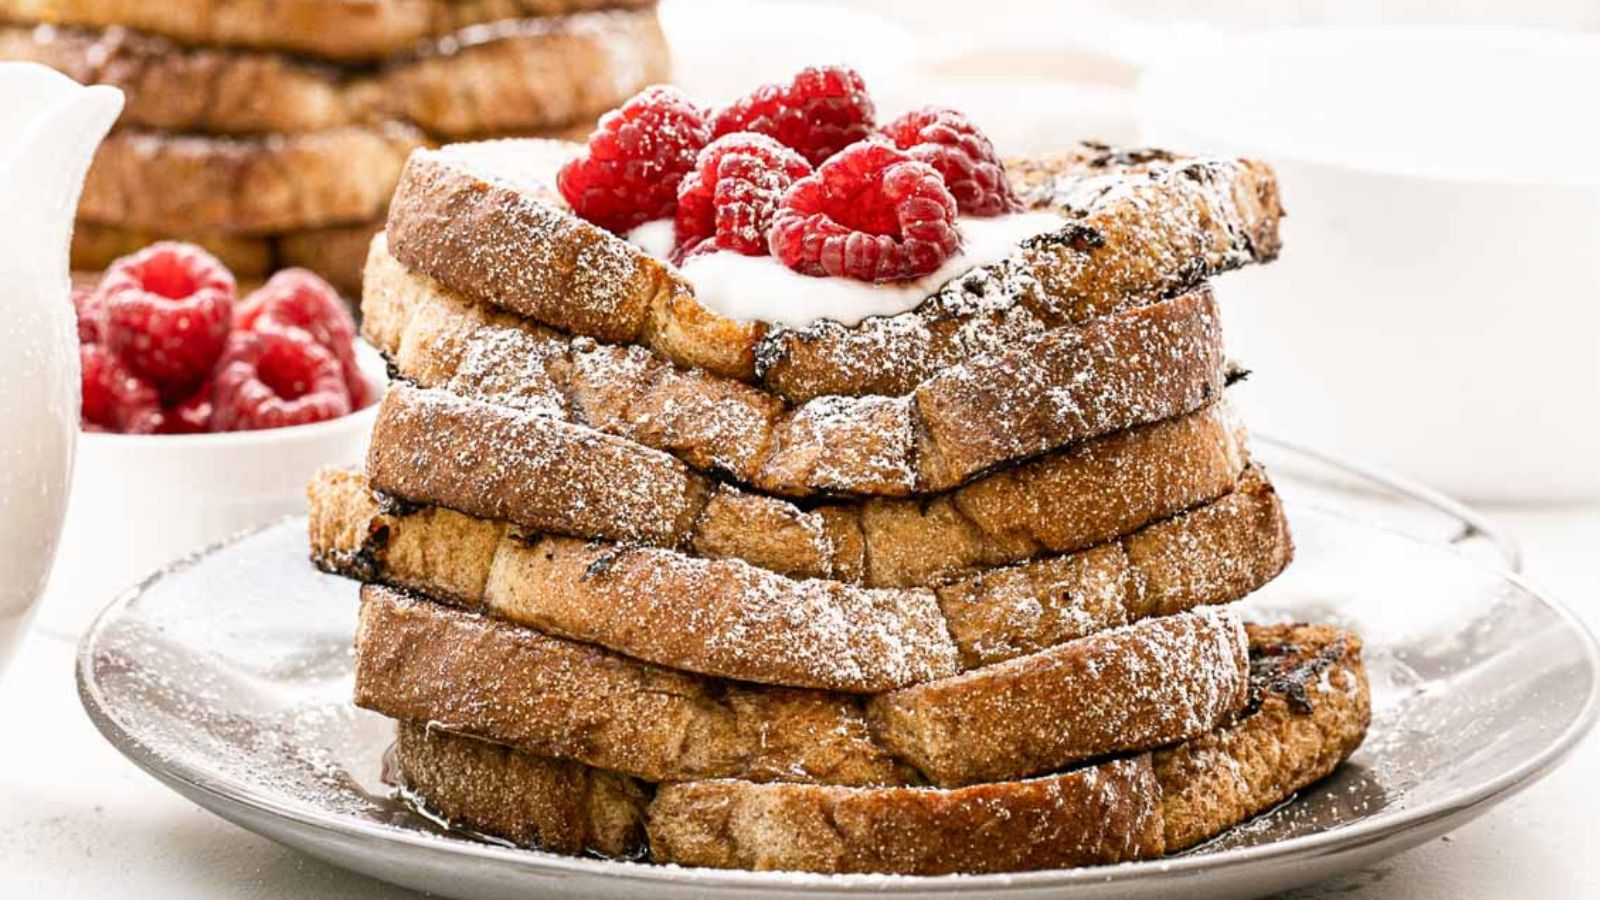 <p>Who knew that vegan French toast could be so satisfying? This recipe uses plant-based ingredients to create a delicious and cruelty-free breakfast. Enjoy the classic taste of French toast topped with your favorite fruits or syrup. <br><strong>Get the Recipe: </strong><a href="https://twocityvegans.com/easy-vegan-french-toast/?utm_source=msn&utm_medium=page&utm_campaign=msn" rel="noopener">Easy Vegan French Toast</a></p>